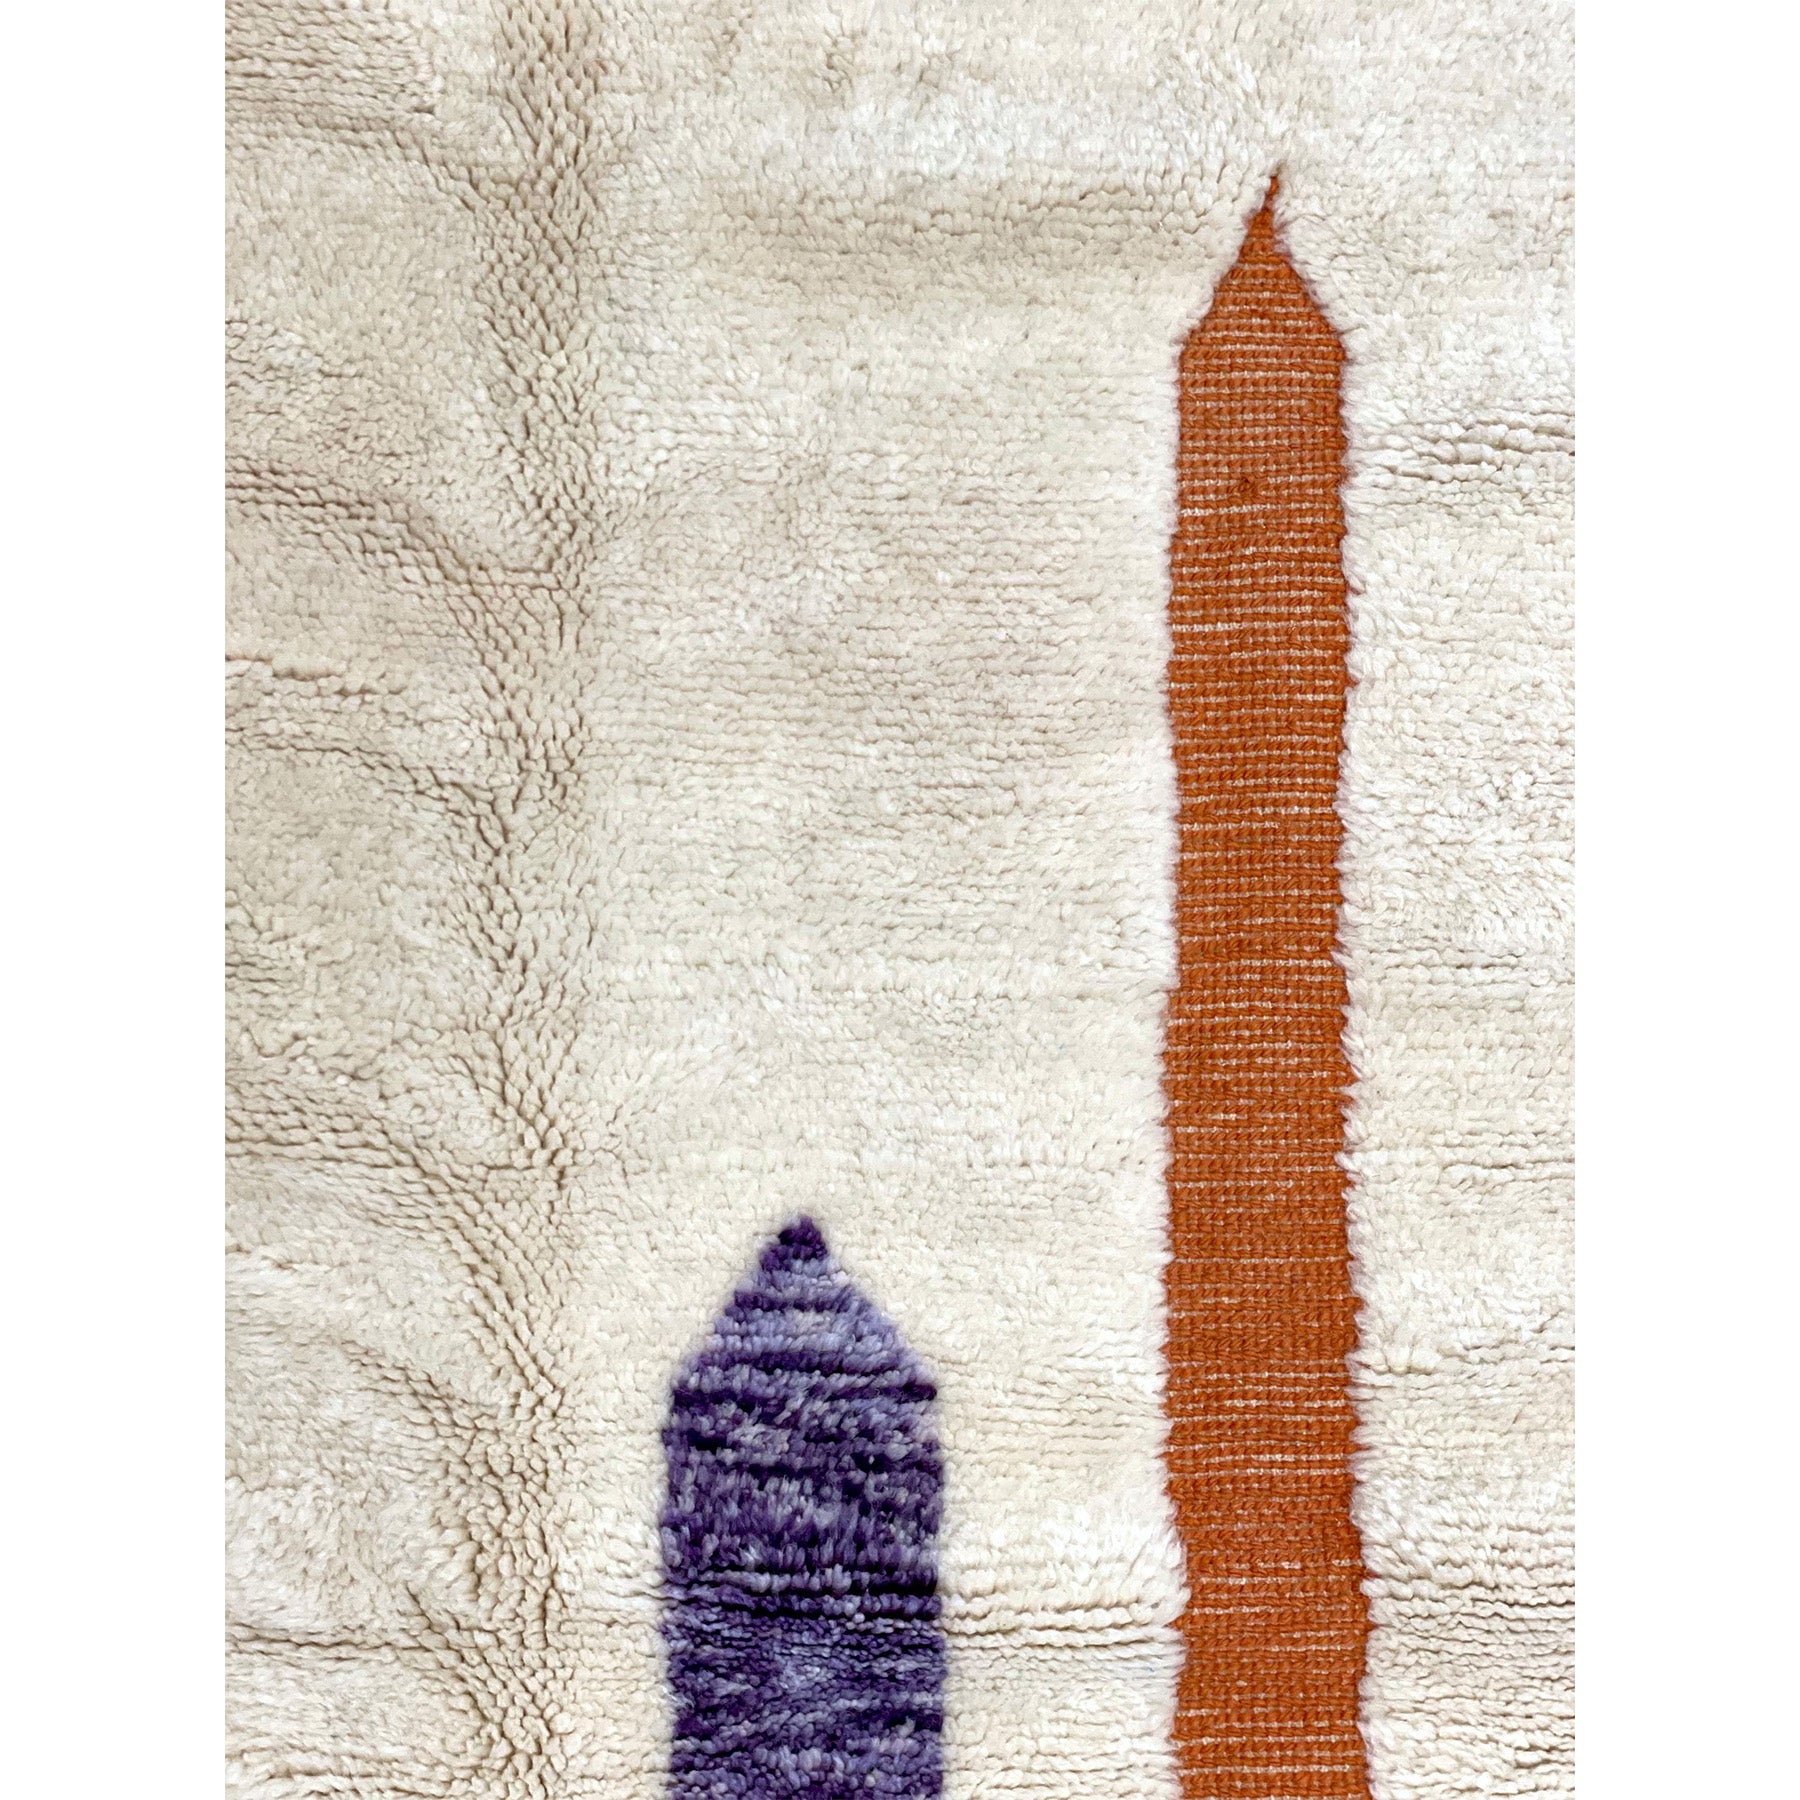 Contemporary handwoven Moroccan area rug in white with orange and purple details - Kantara | Moroccan Rugs